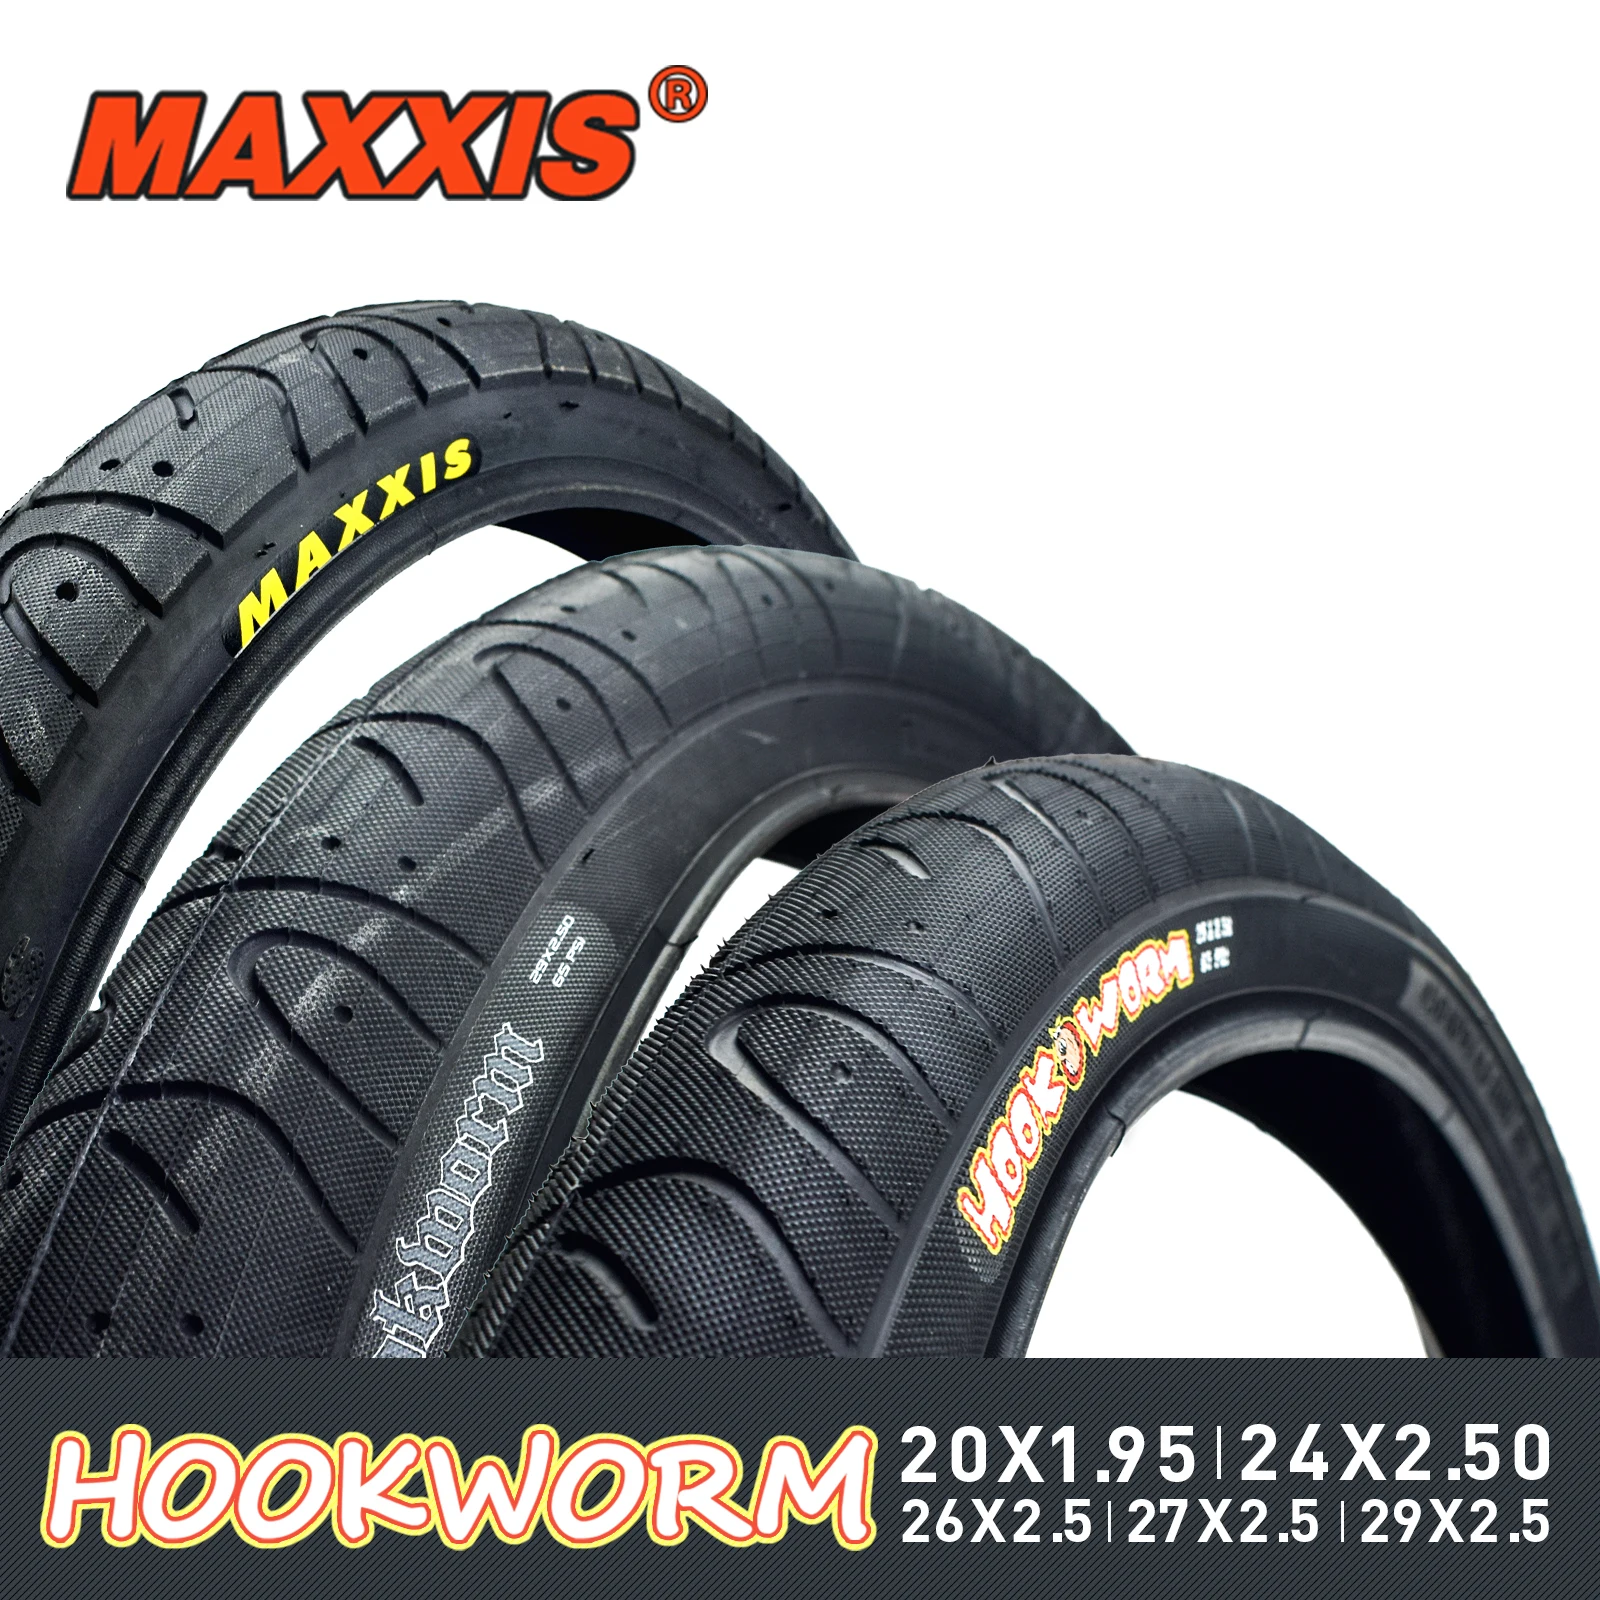 MAXXIS 26 HOOKWORM 26*2.5 20*1.95 29*2.5 Bicycle Tire MTB Mountain Bike  Tires Dirt Jumping Urban Street Trial Parts